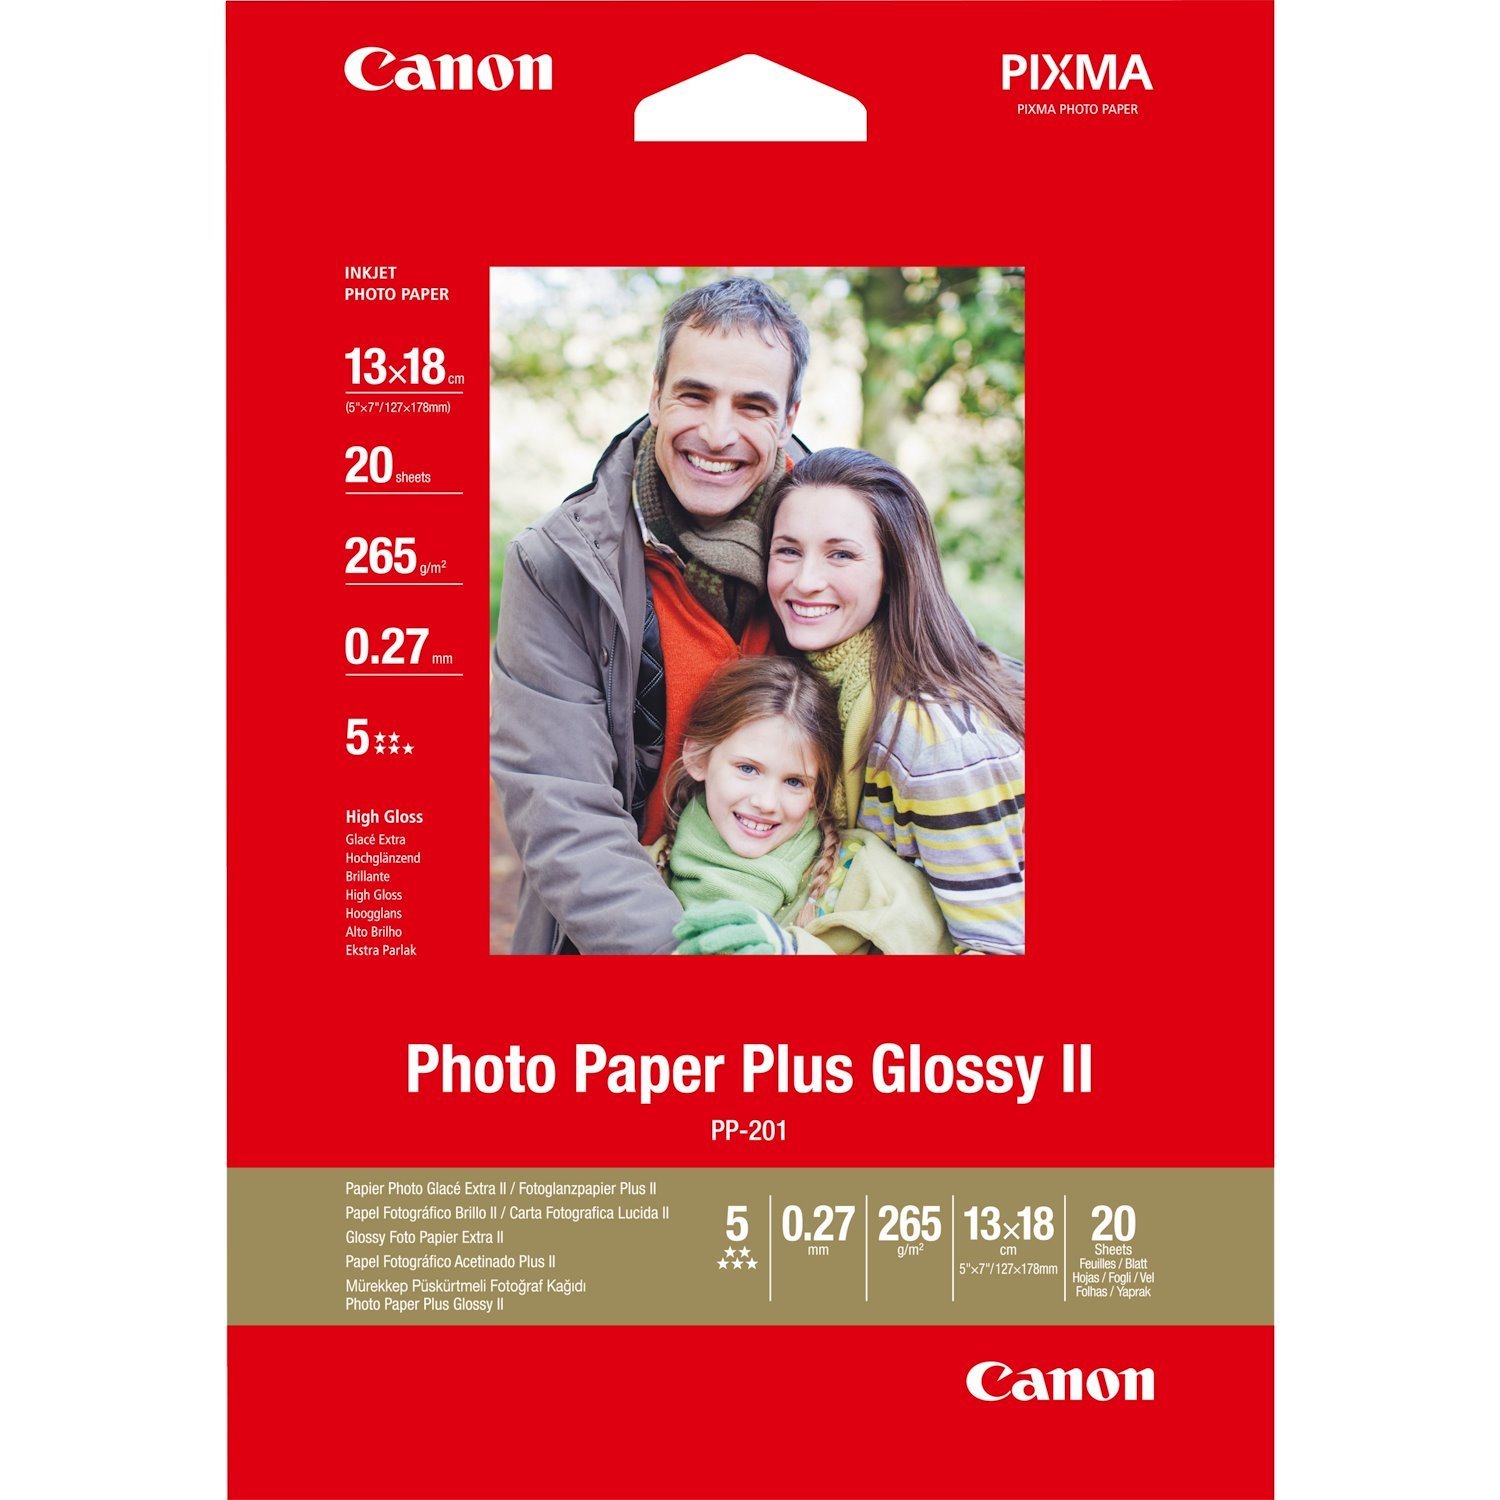 Canon PP-201 Glossy Ii Photo Paper Plus 5X7 - 20 Sheets (Canon PP-201 Glossy Photo Paper 13 X 18CM 20 Sheets - 2311B018)